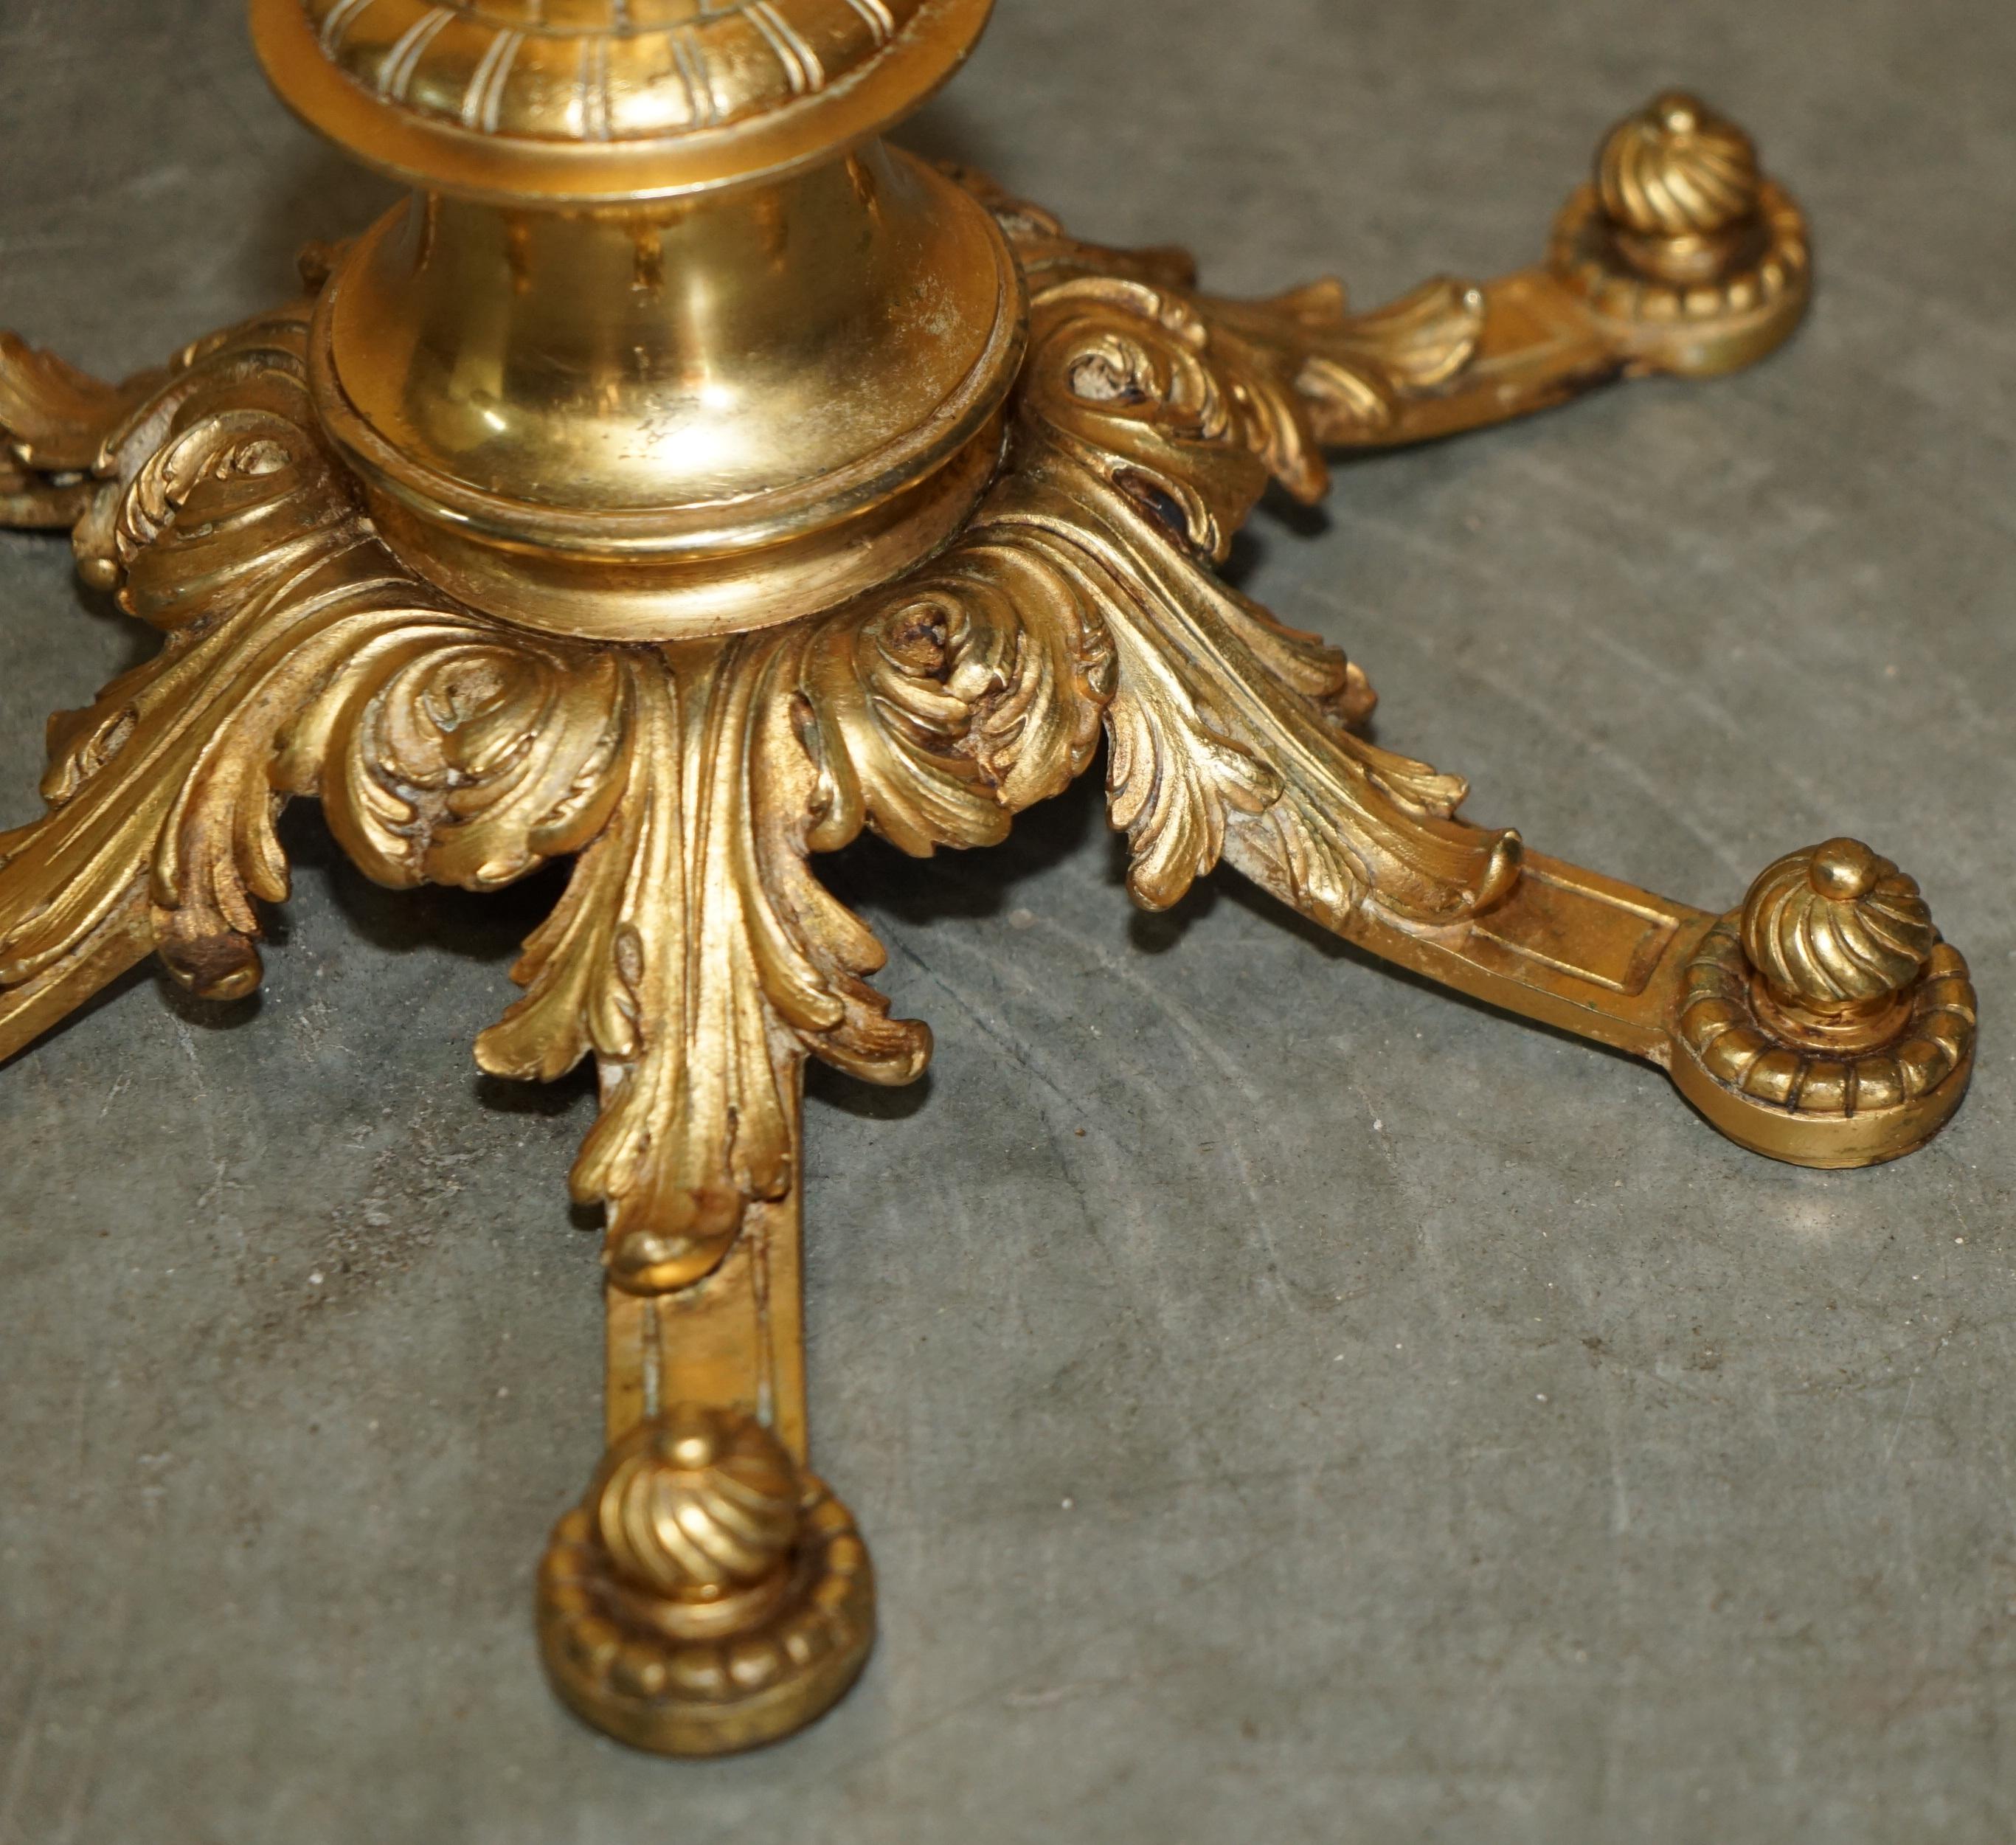 EXQUISITE ANTIQUE CIRCA 1900 BRASS SiDE END LAMP TABLE WITH THICK MARBLE TOP For Sale 5